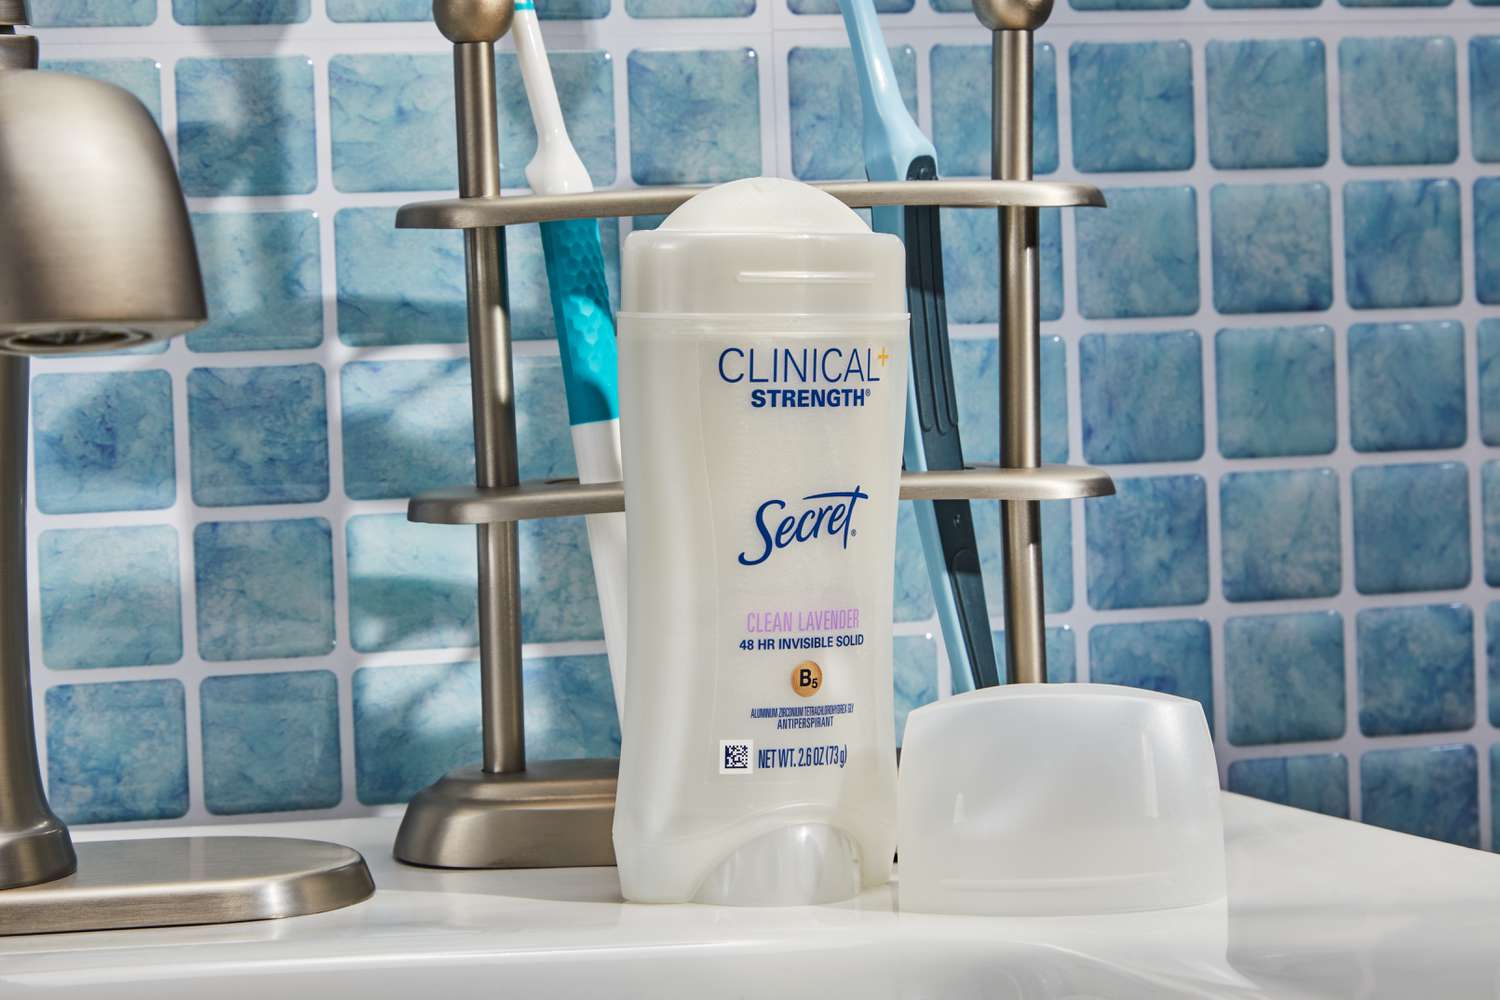 Secret Clinical Strength Soft Solid Deodorant displayed on the bathroom countertop